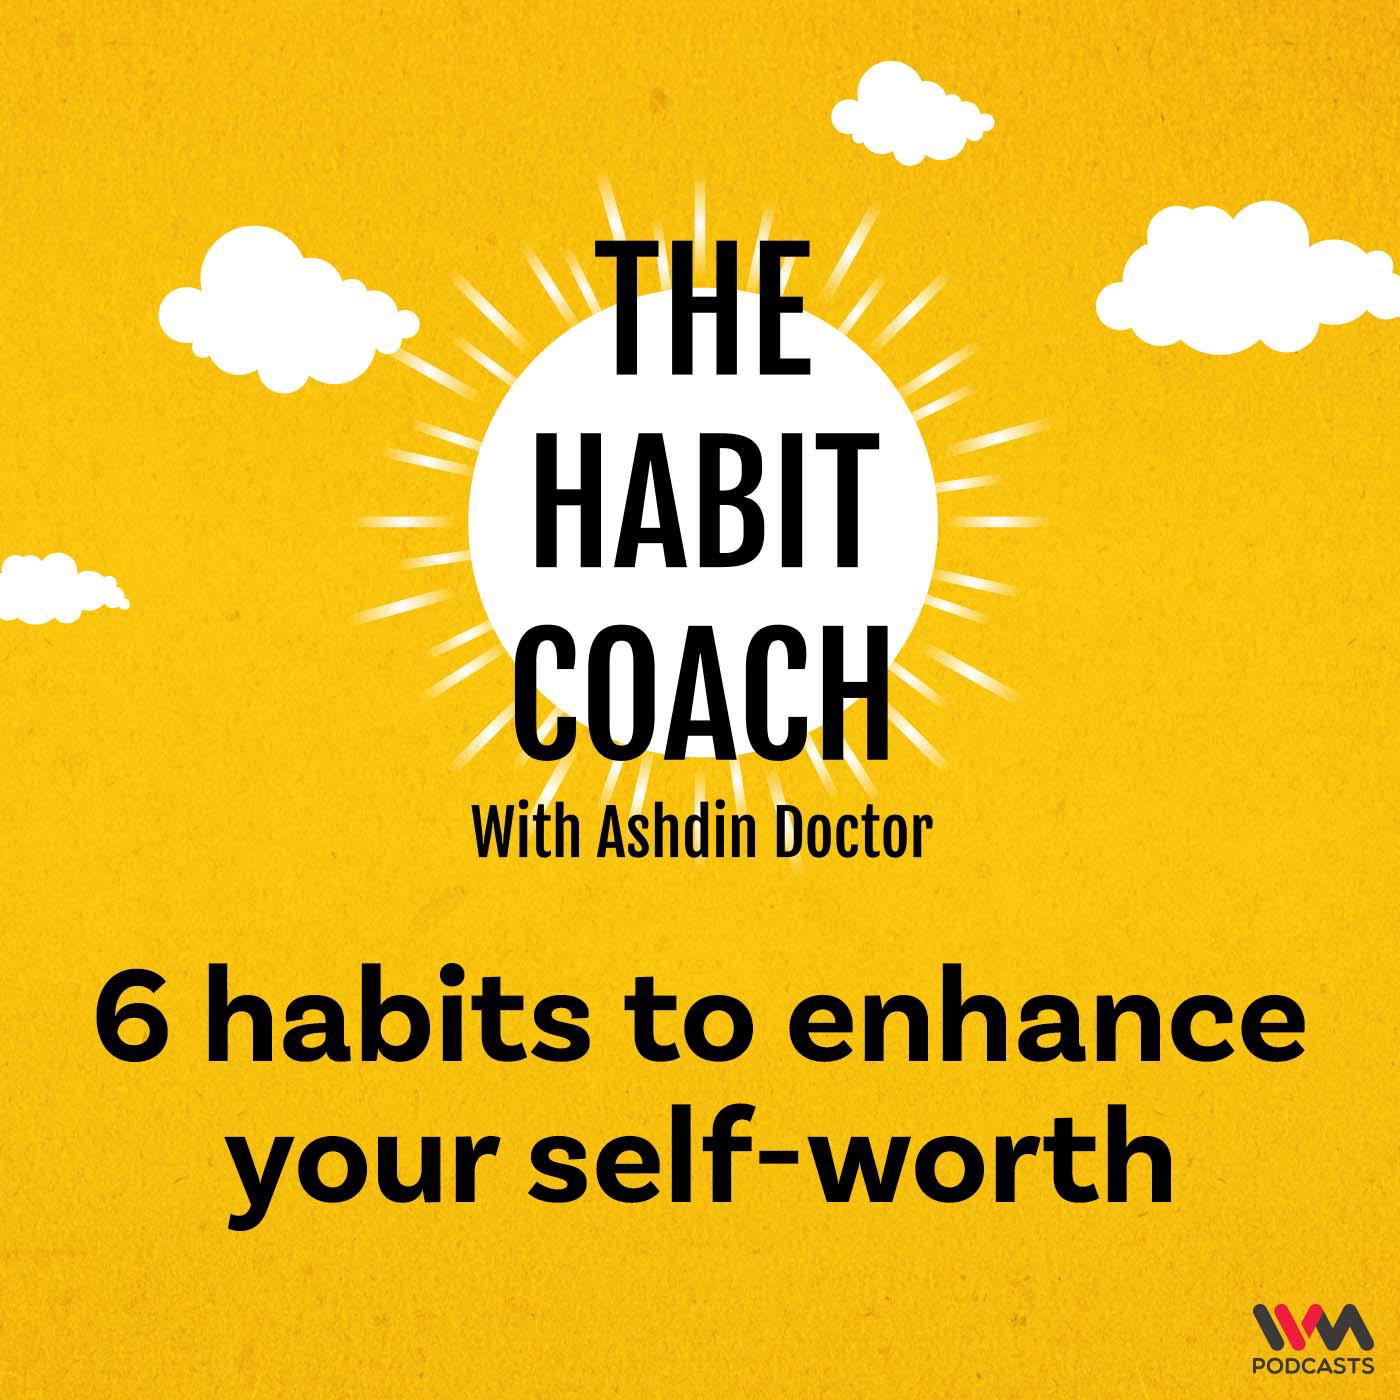 6 habits to enhance your self-worth